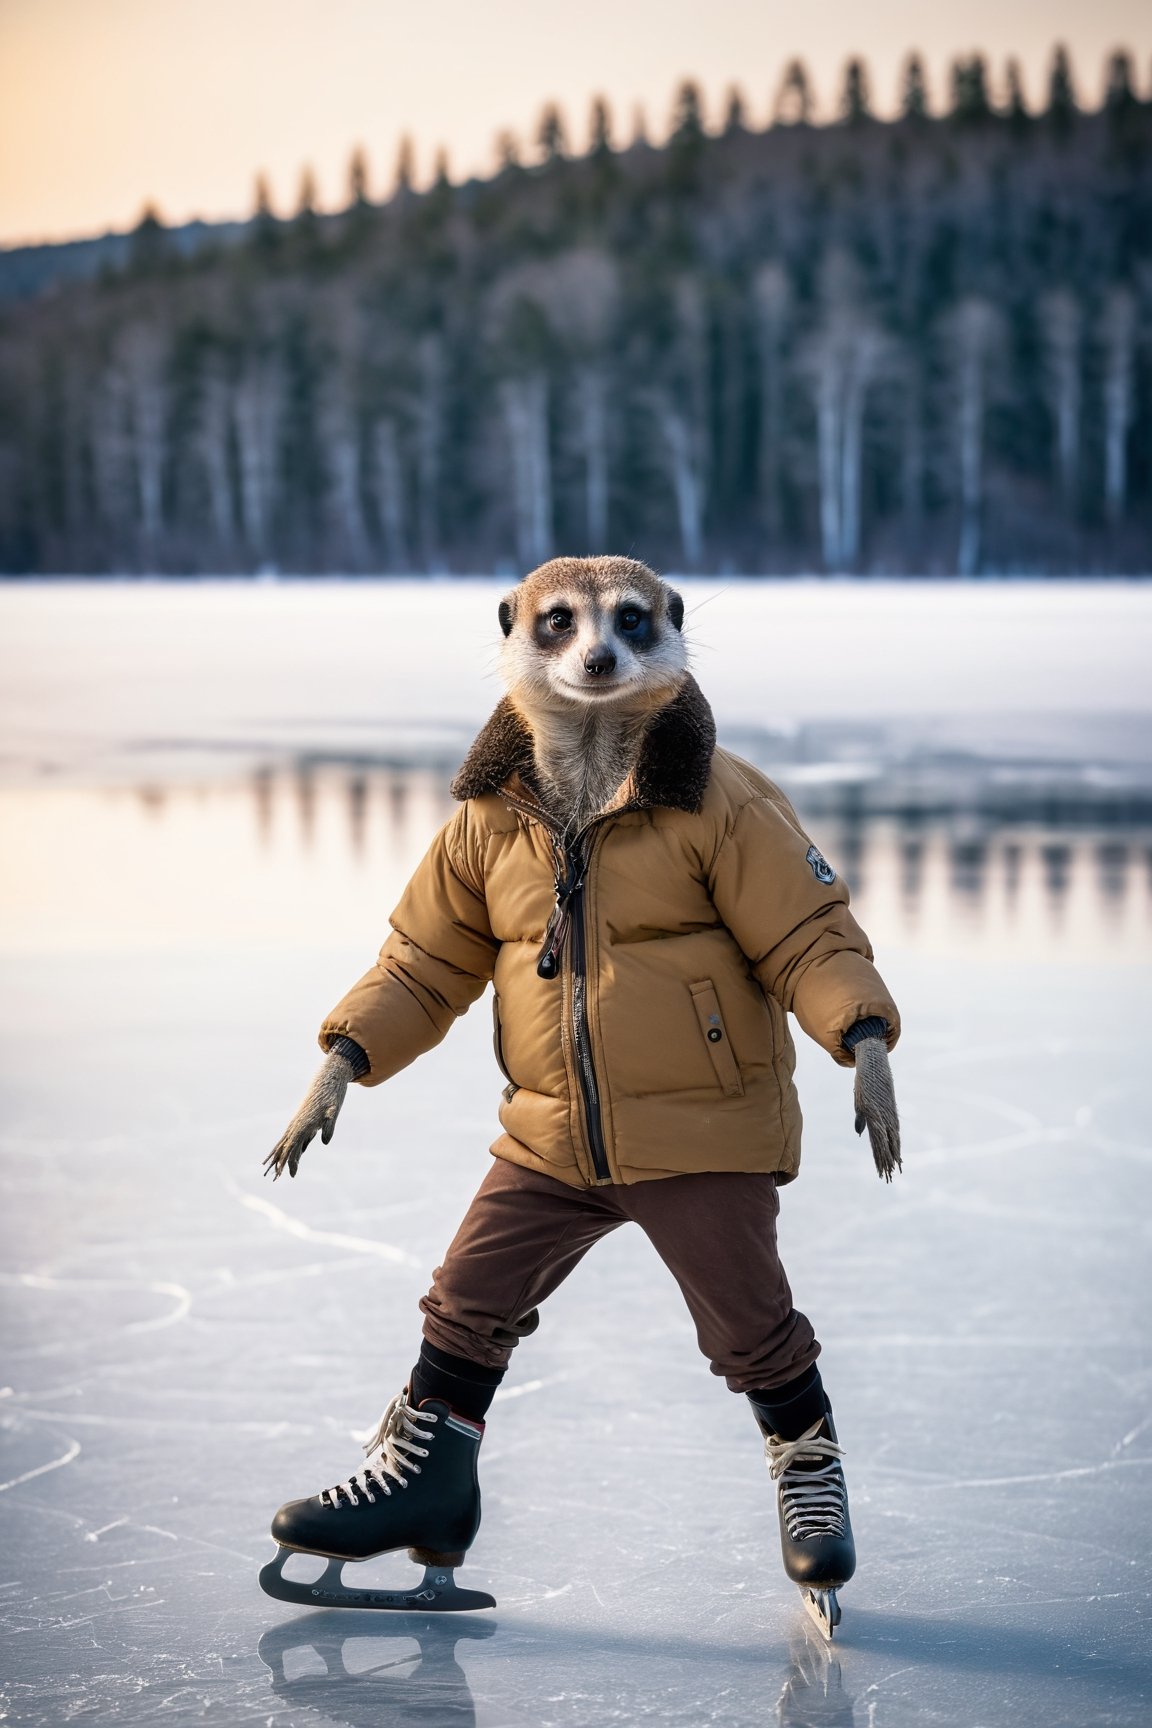 A anthropomorphic meerkat wearing a thick down jacket and (ice skates), skating on a frozen lake, Norwegian forests in the background, early morning, cold lighting, highly detailed, Fujifilm XT-4

